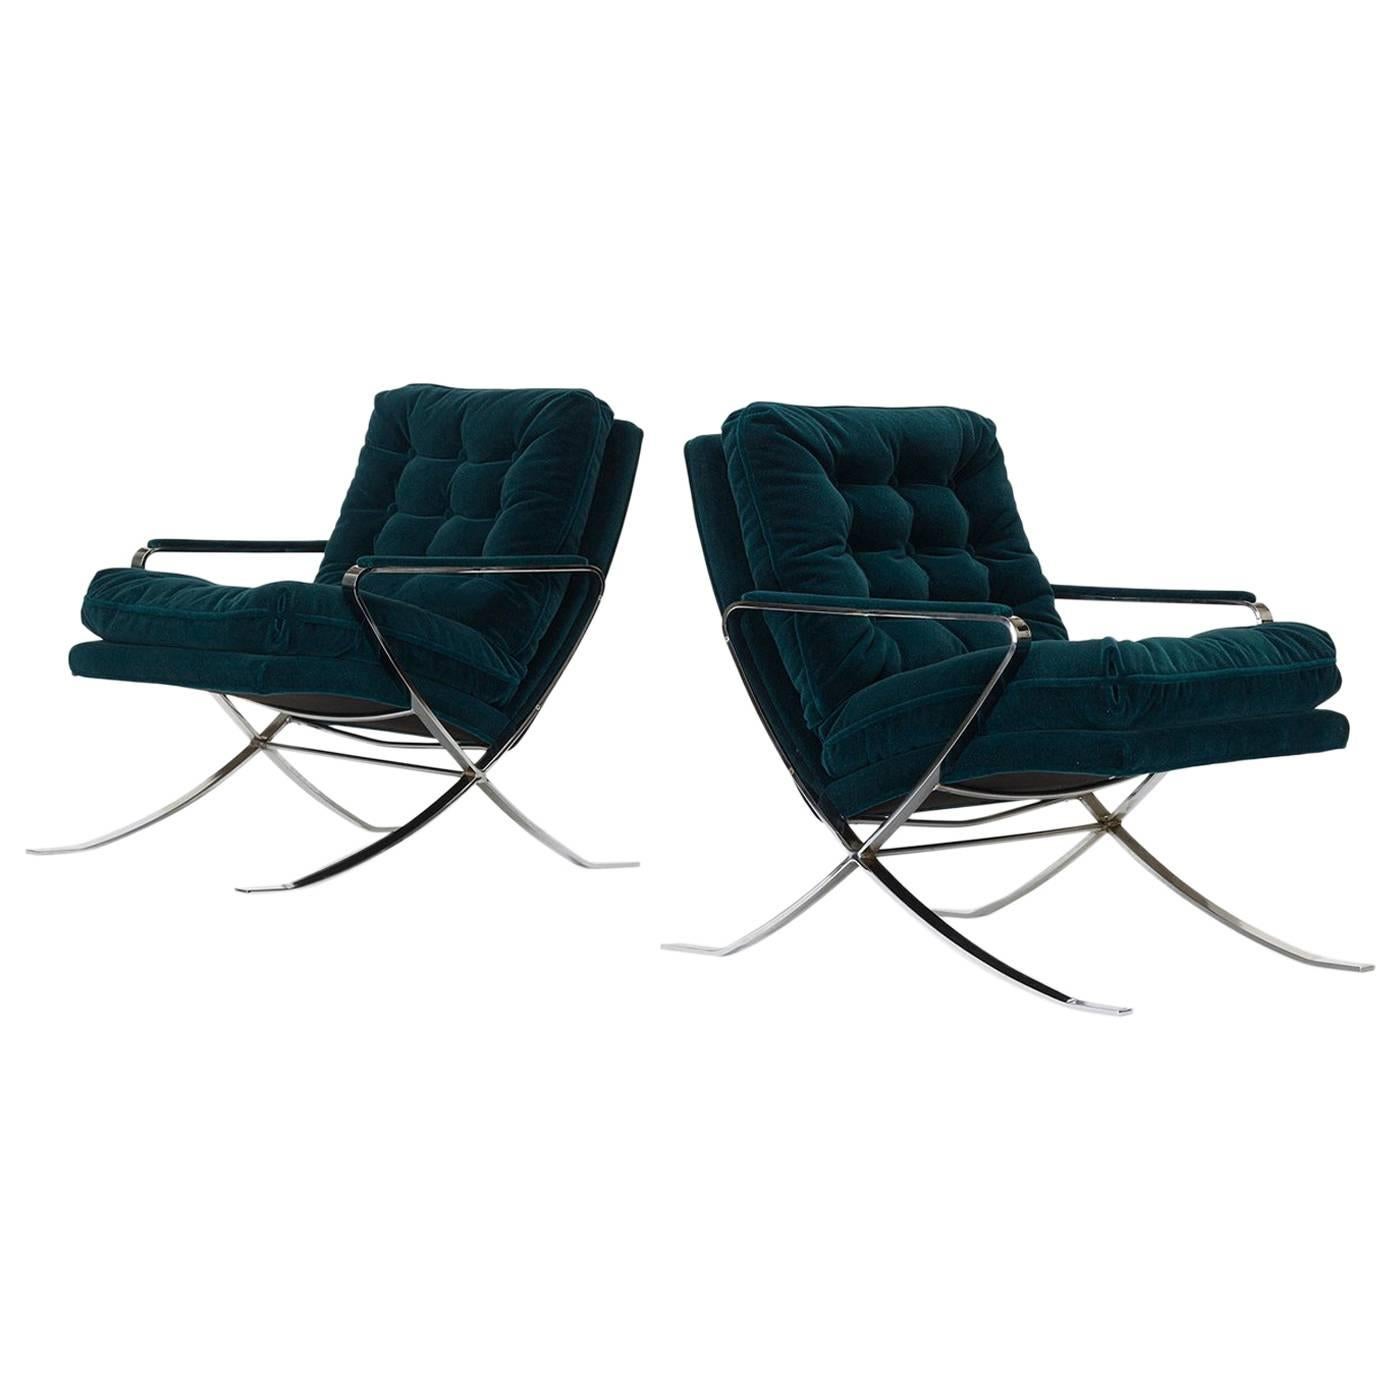 Pair of Lounge Chairs by Bernhardt Furniture Co